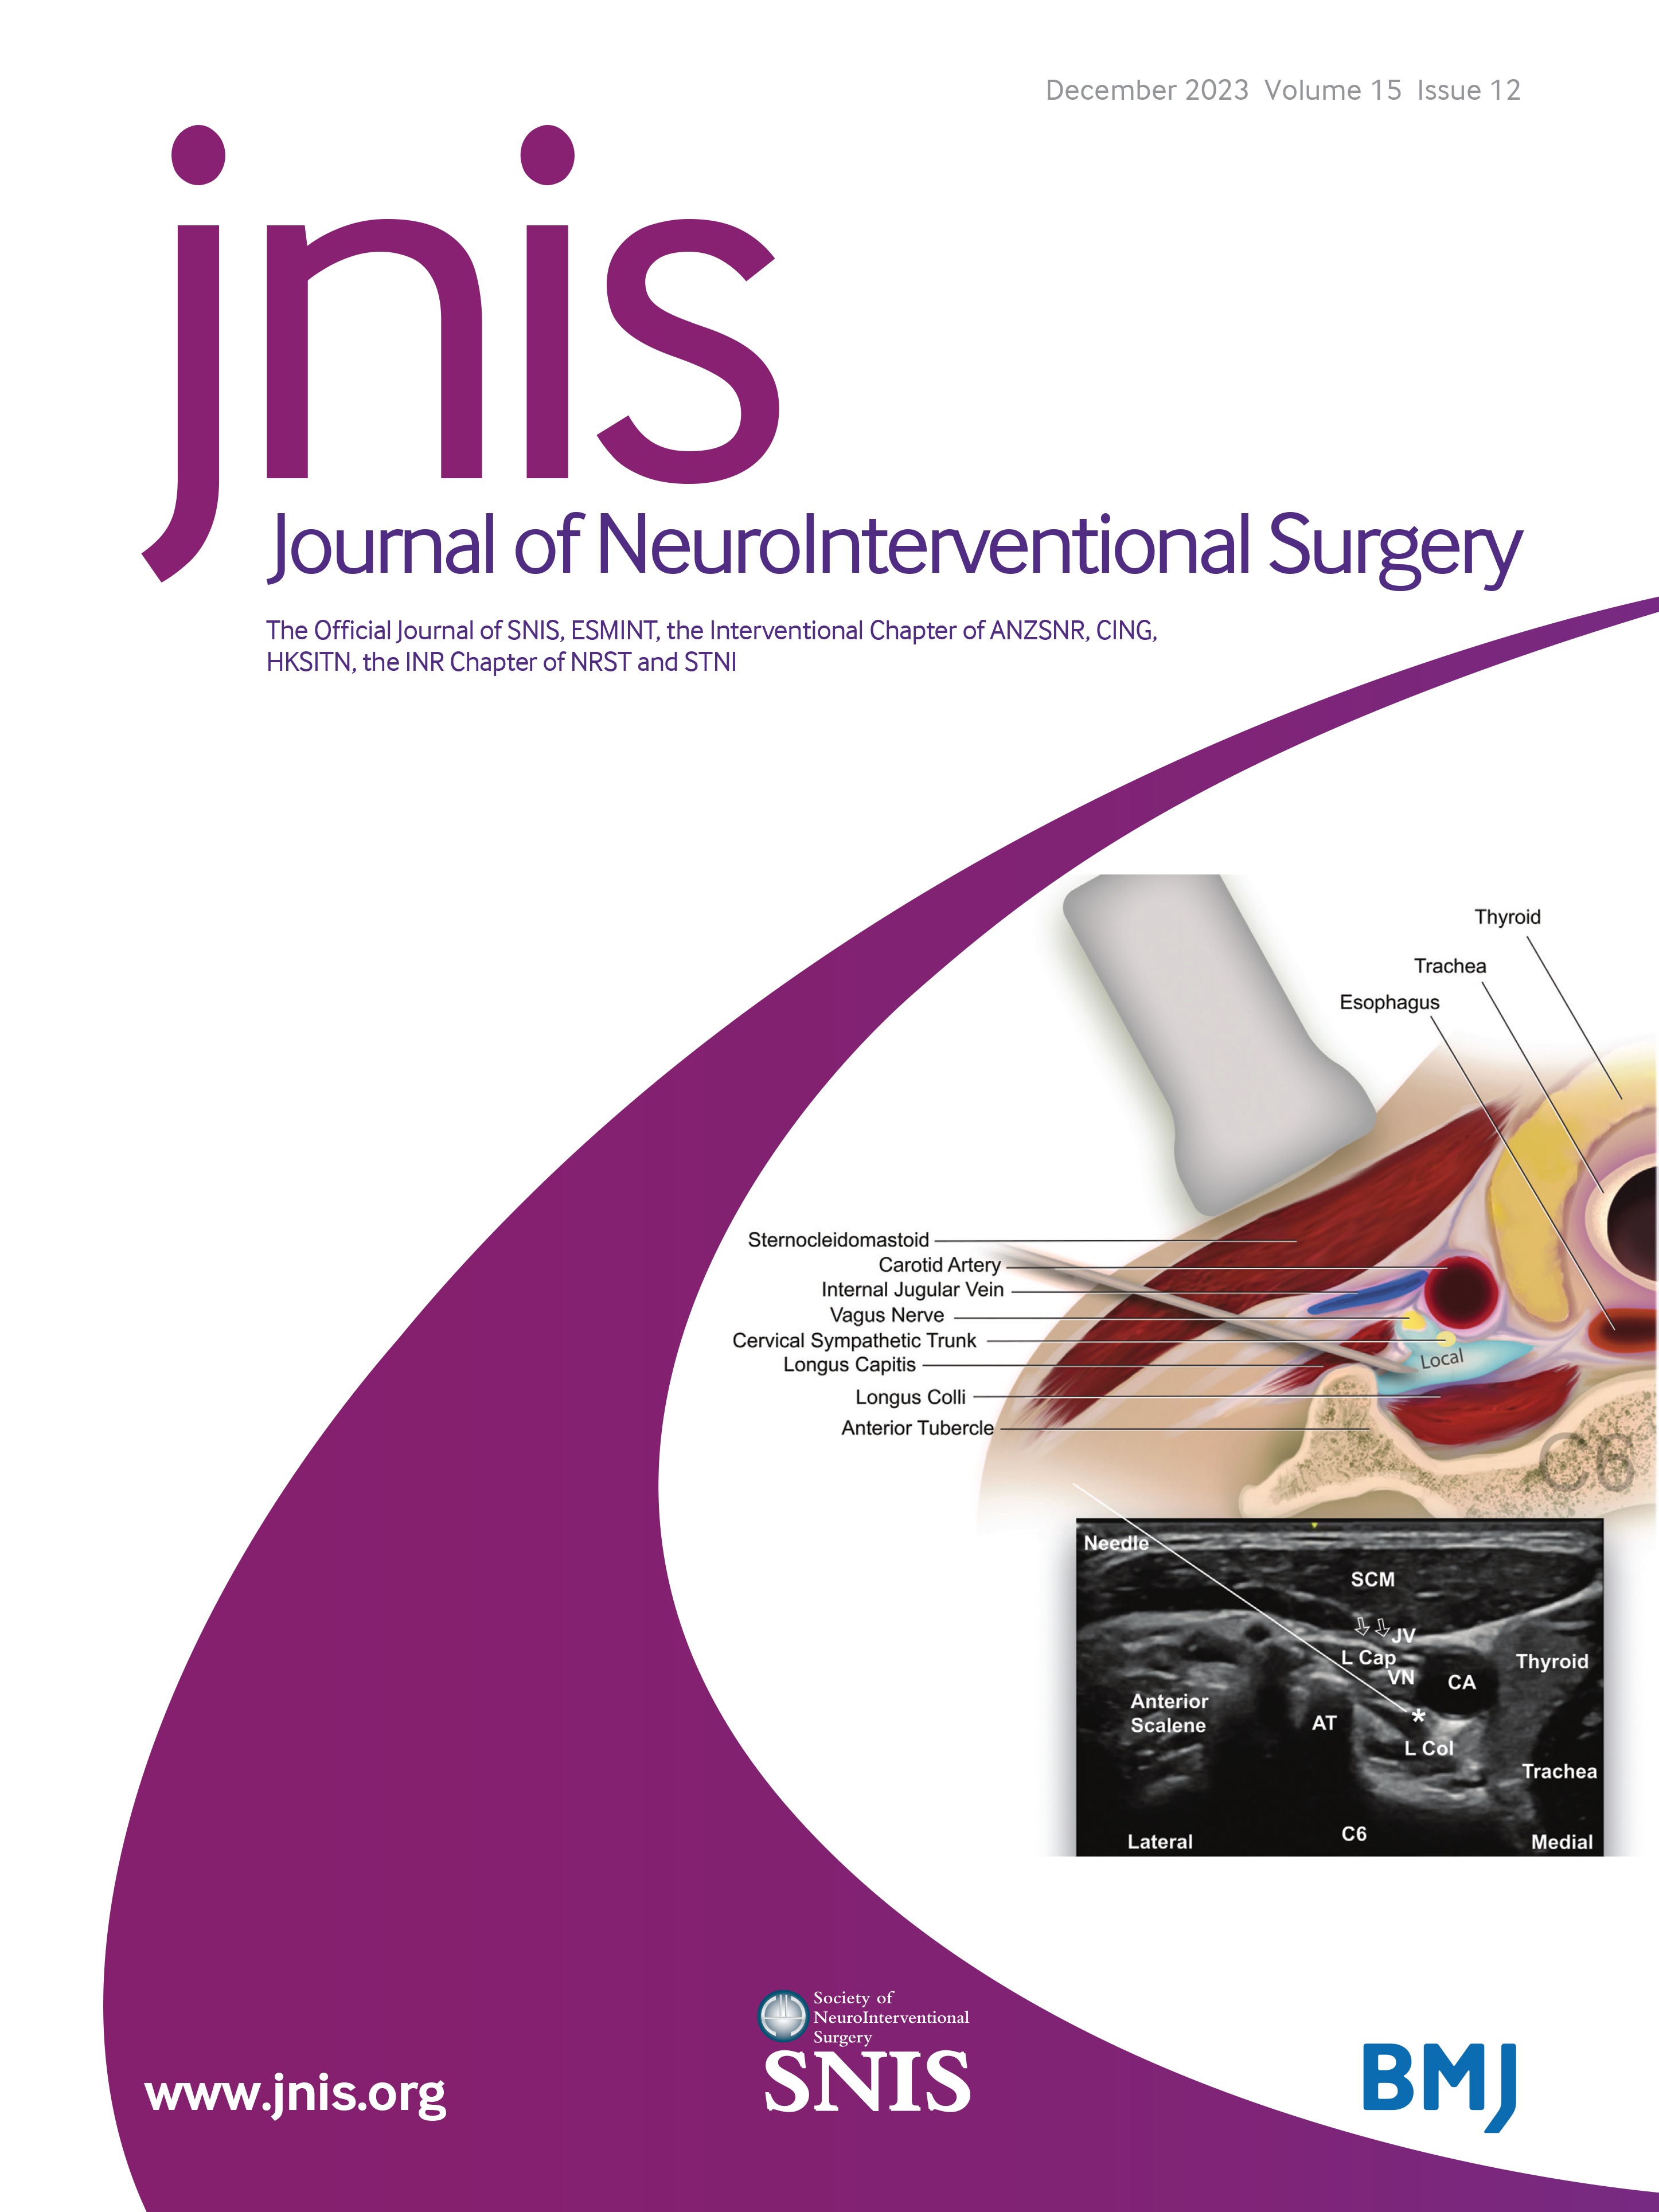 Safety and Efficacy of Flow Diverters for Treatment of Unruptured Anterior Communicating Artery Aneurysms: Retrospective Multicenter Study